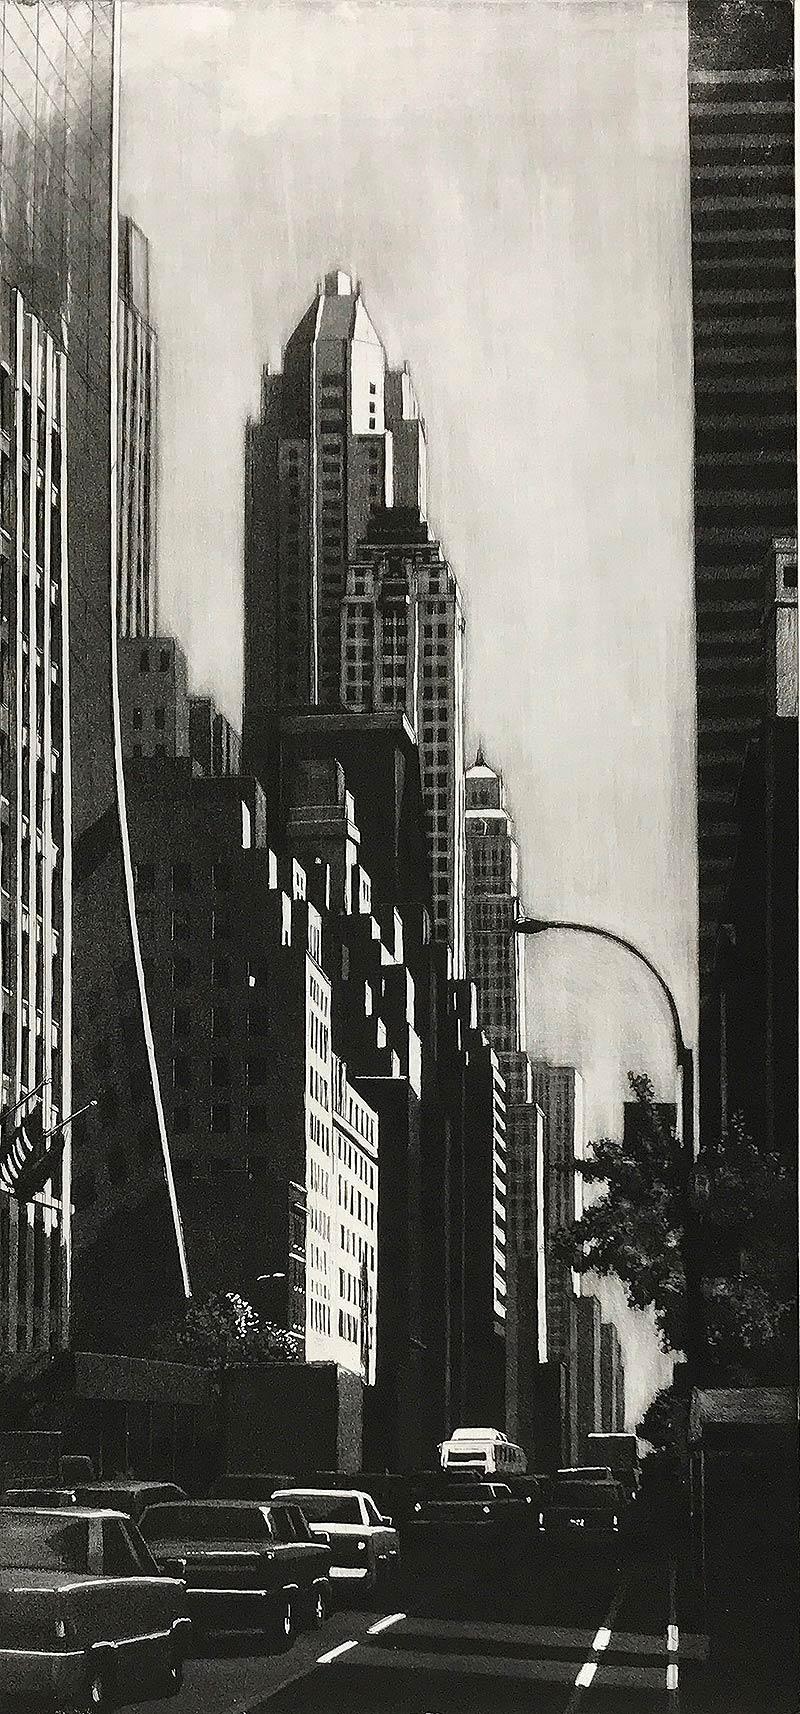 Richard Haas Portrait Print - 57th St. Looking East (View down Sixth Ave/ Fuller BLDG, the Ritz and IBM seen)